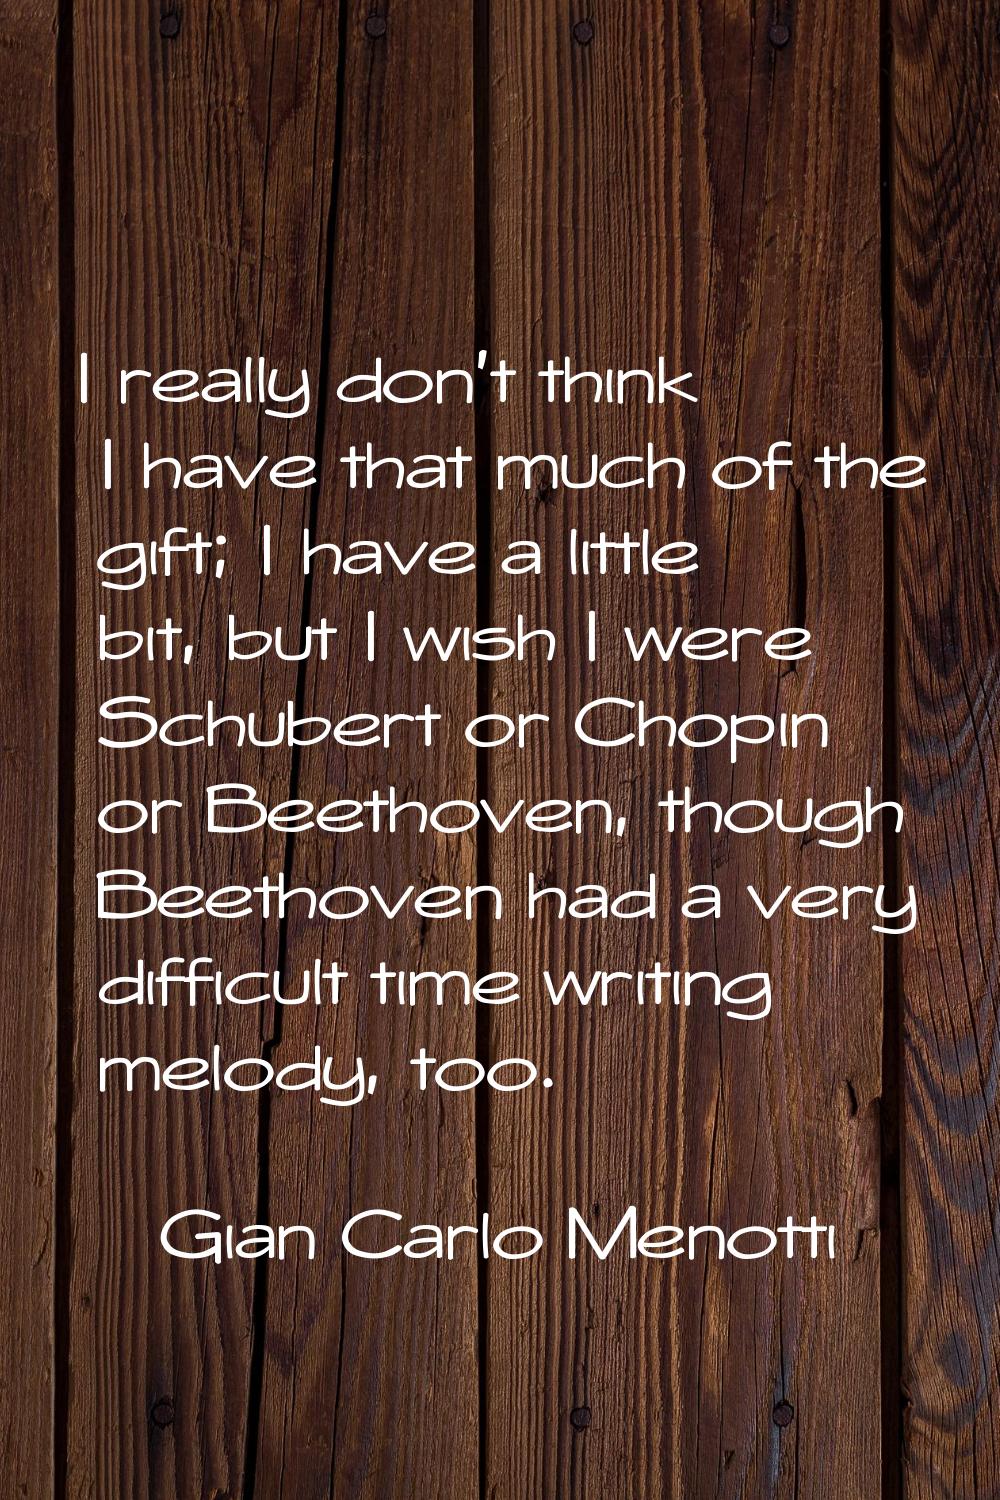 I really don't think I have that much of the gift; I have a little bit, but I wish I were Schubert 